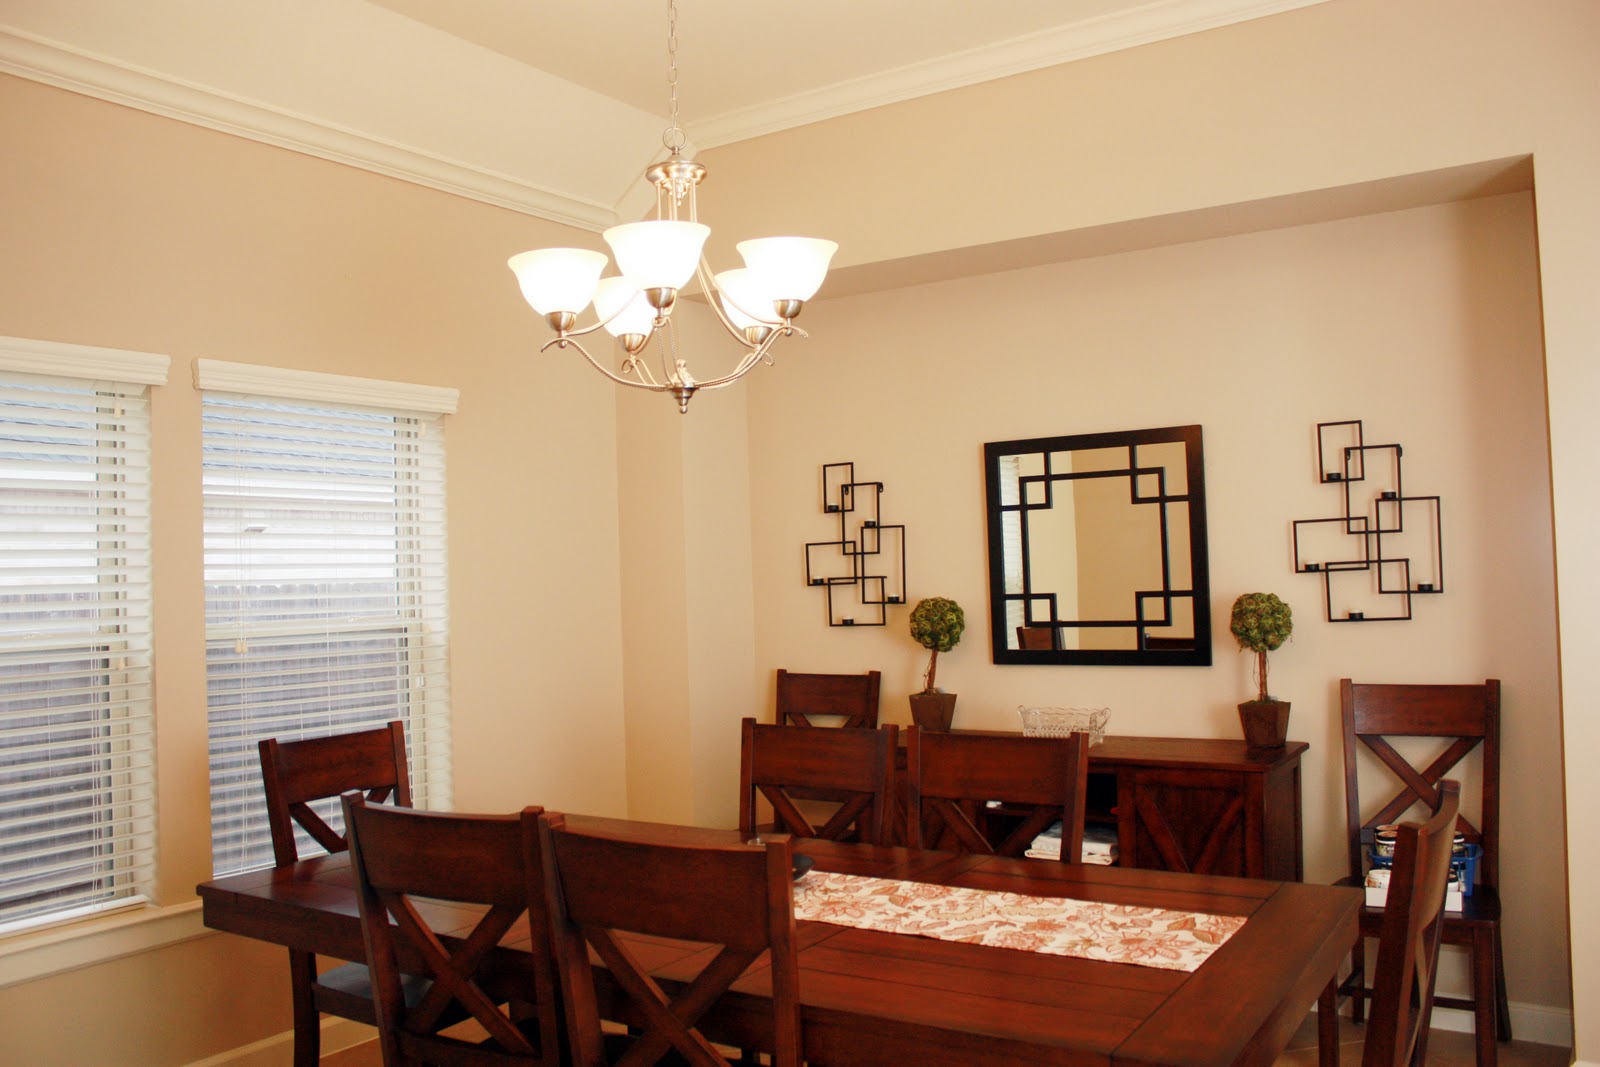 Dining Room Wooden Traditional Dining Room Interior With Wooden Dining Furniture Completed With Traditional Dining Room Light Fixtures Ideas Dining Room Dining Room Lighting Fixtures With Chandelier And Fans To Enlighten Your Dining Experience